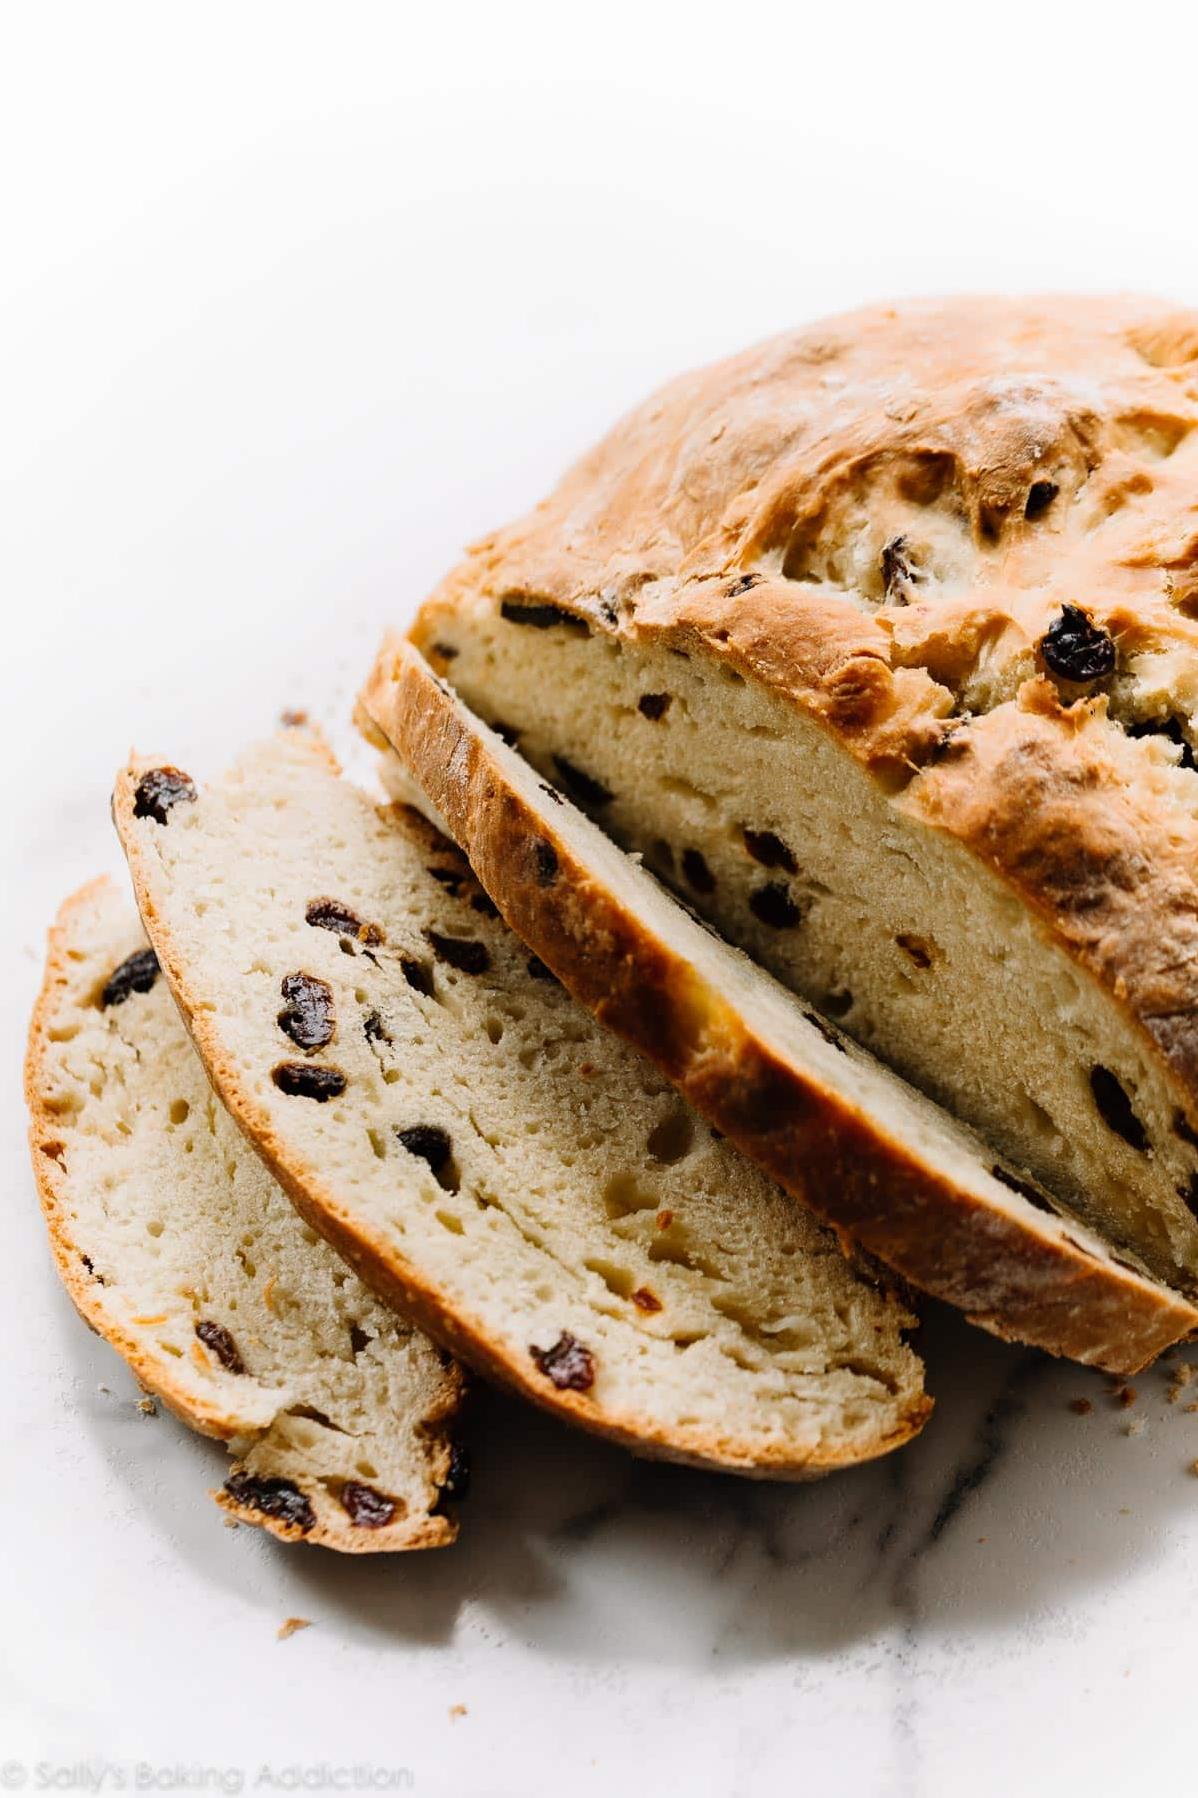  Simple ingredients combine to make a delicious and satisfying bread.